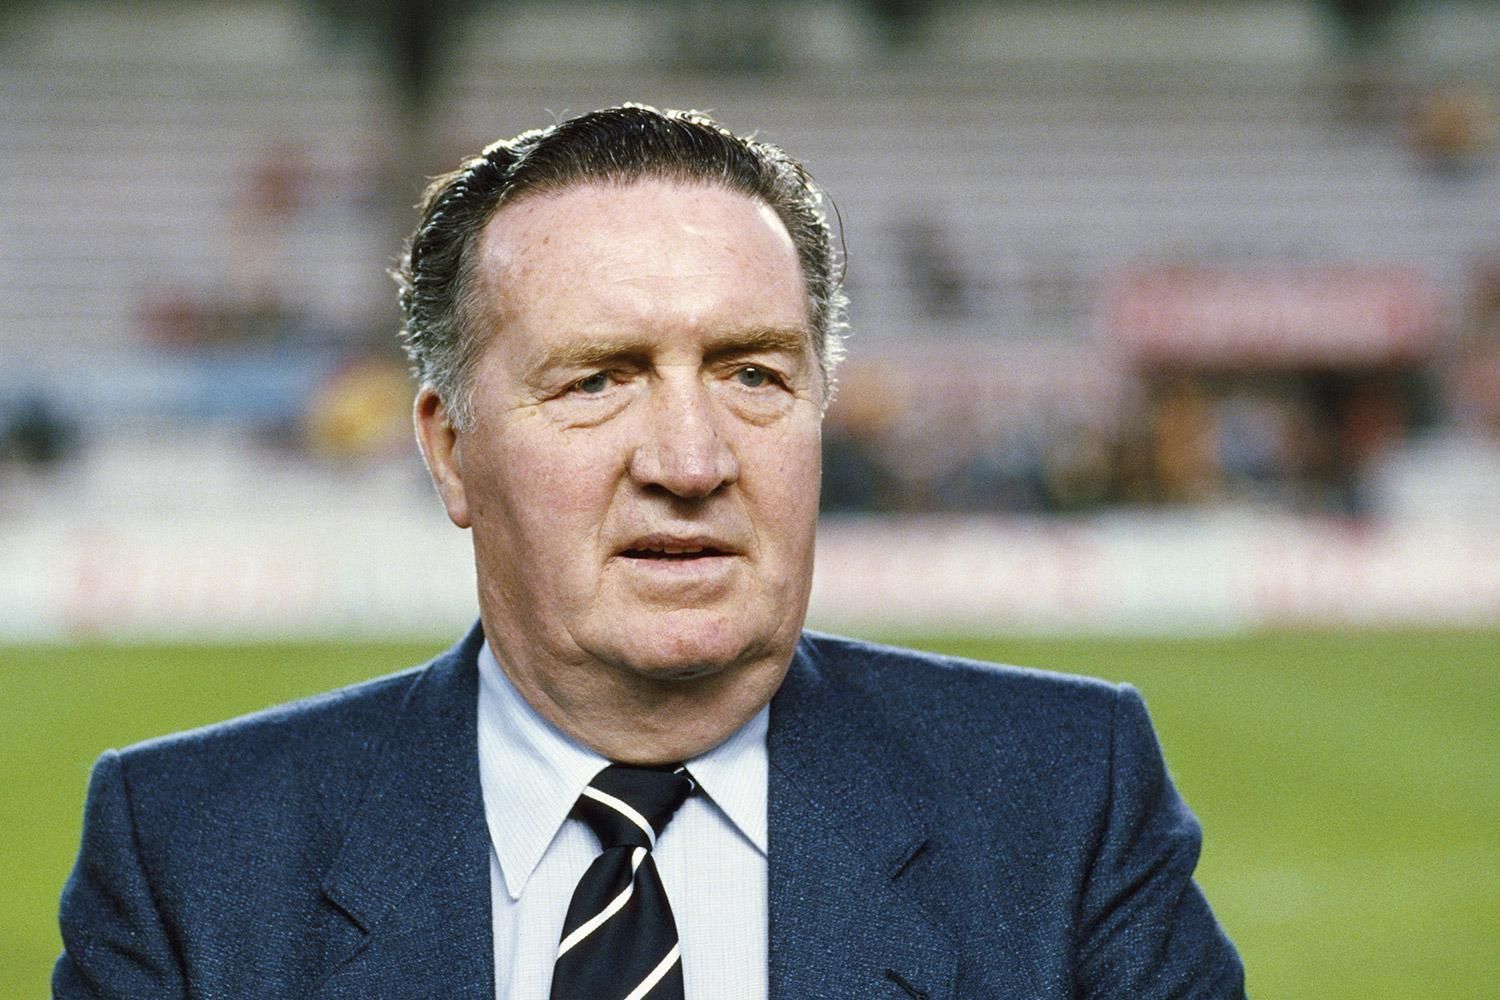 John &#039;Jock&#039; Stein is a legendary Scottish manager who managed Celtic and the Scotland national team